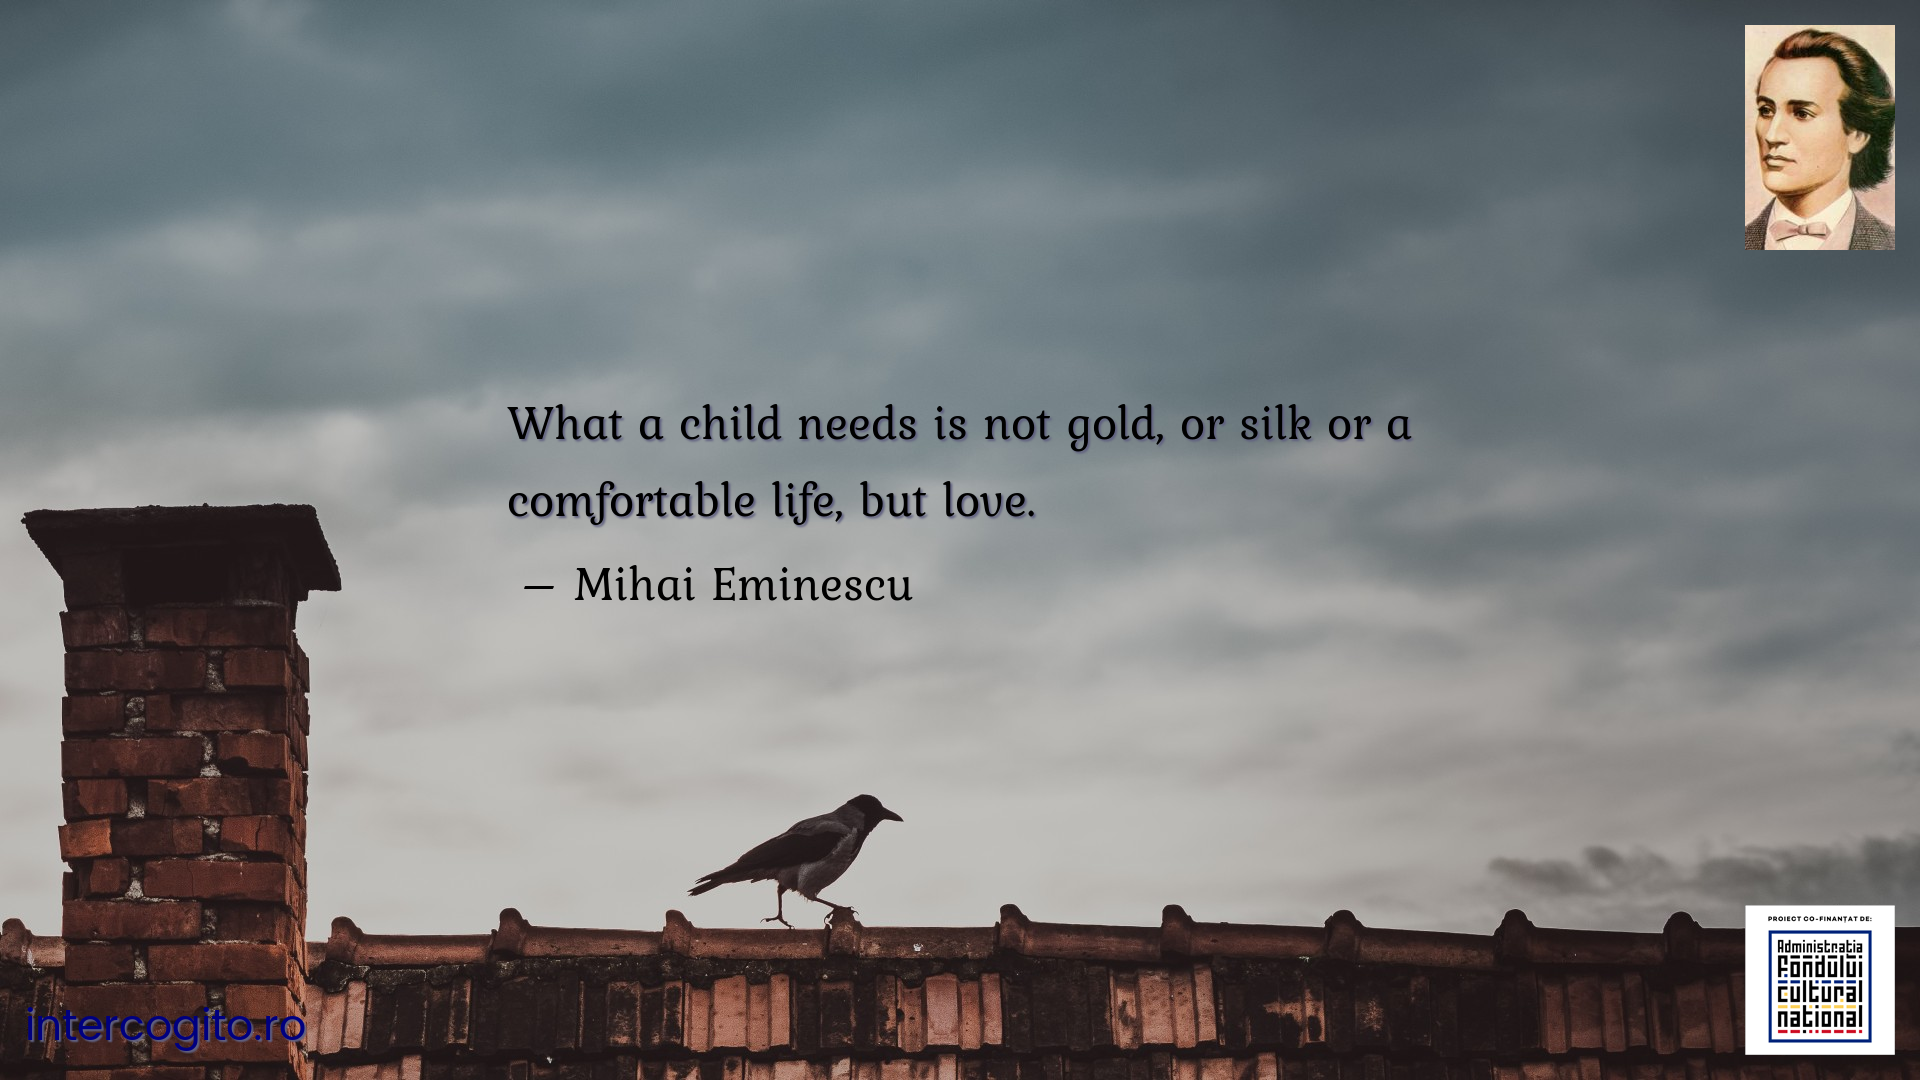 What a child needs is not gold, or silk or a comfortable life, but love.